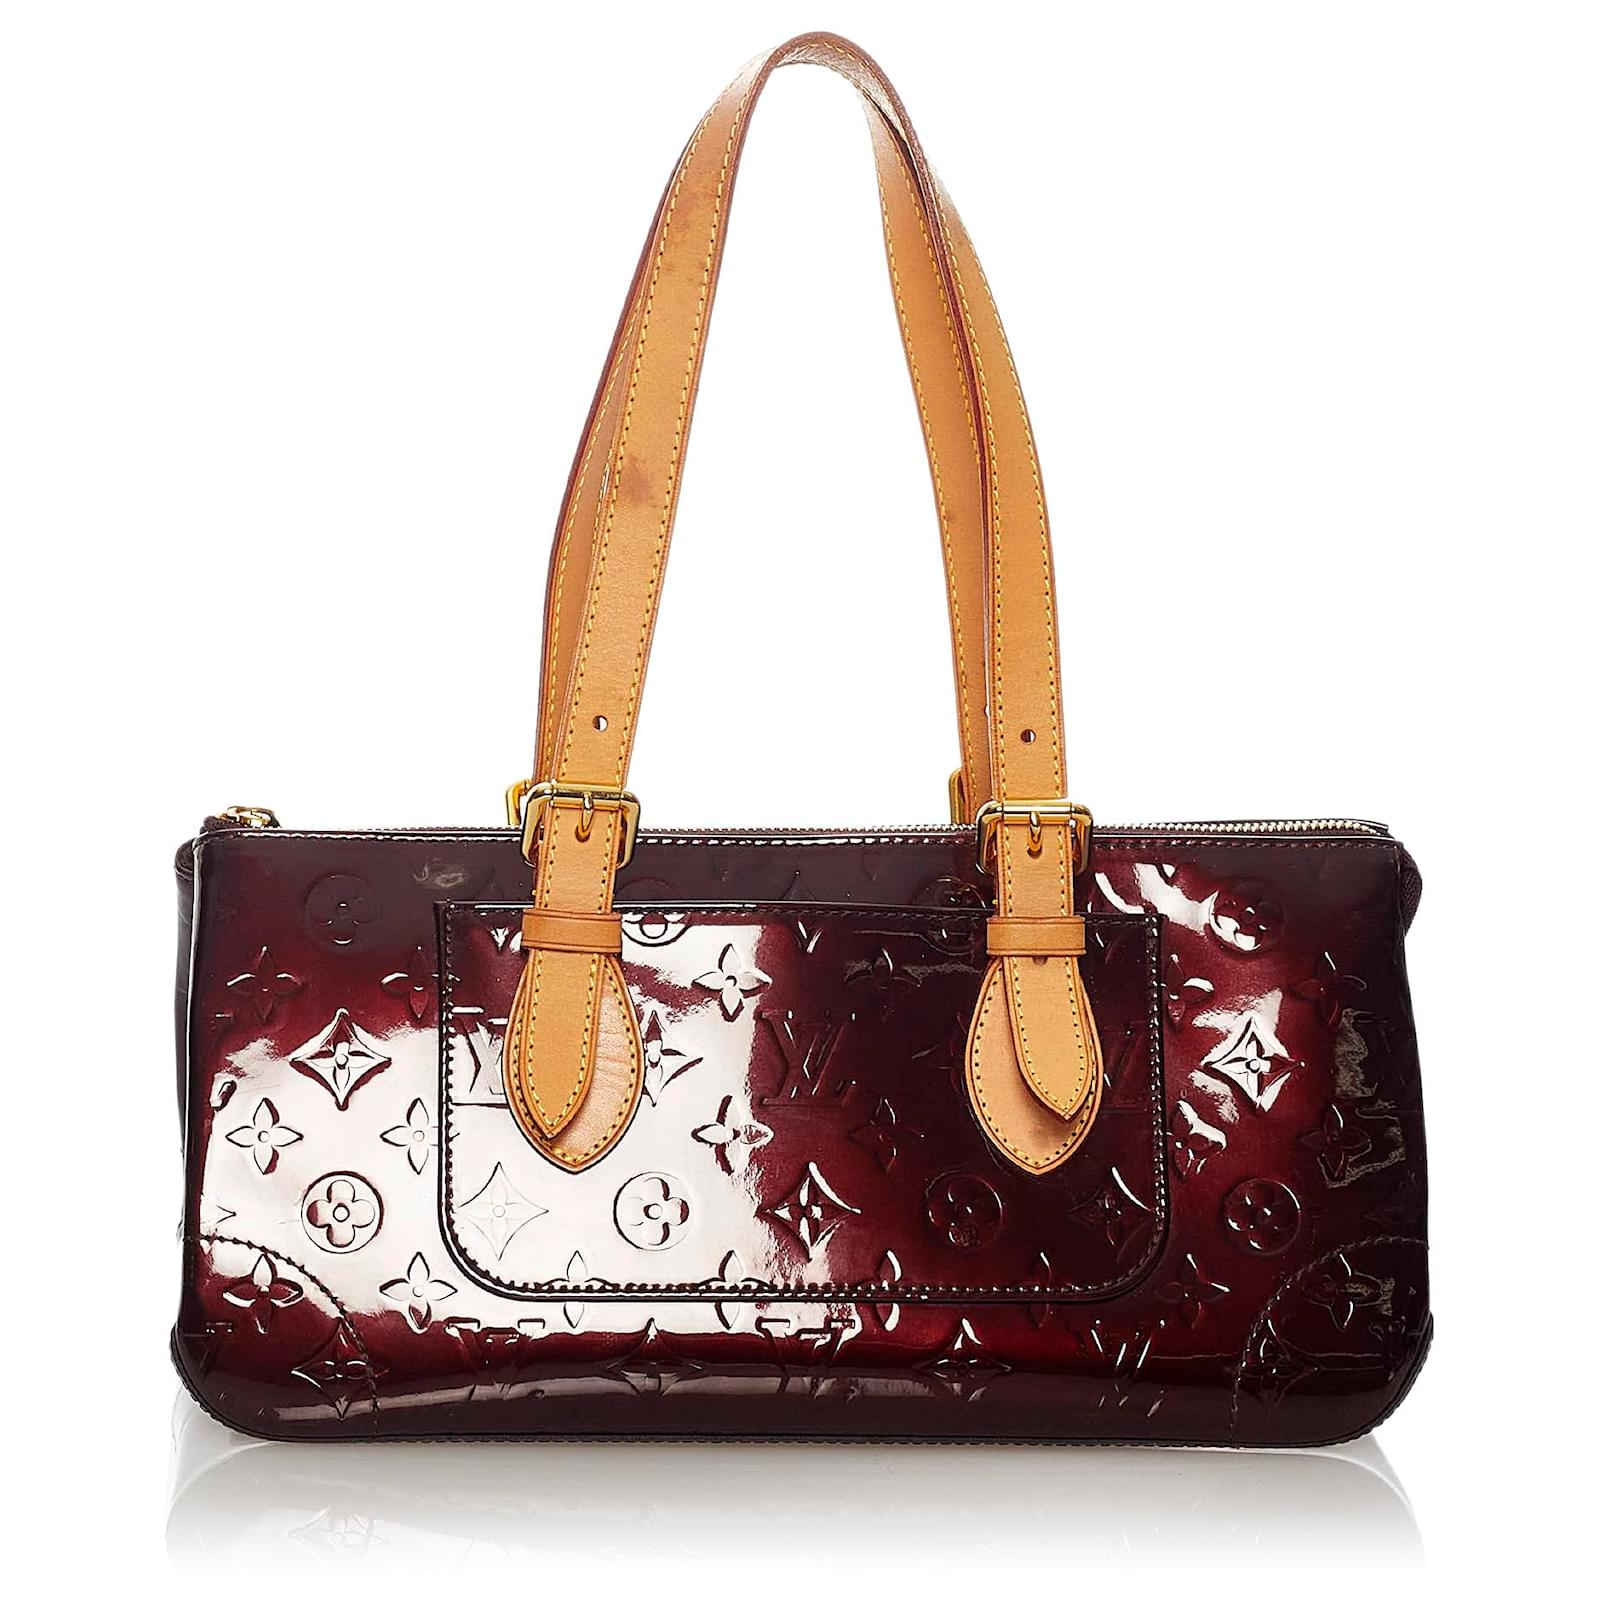 Patent leather handbag Louis Vuitton Burgundy in Patent leather